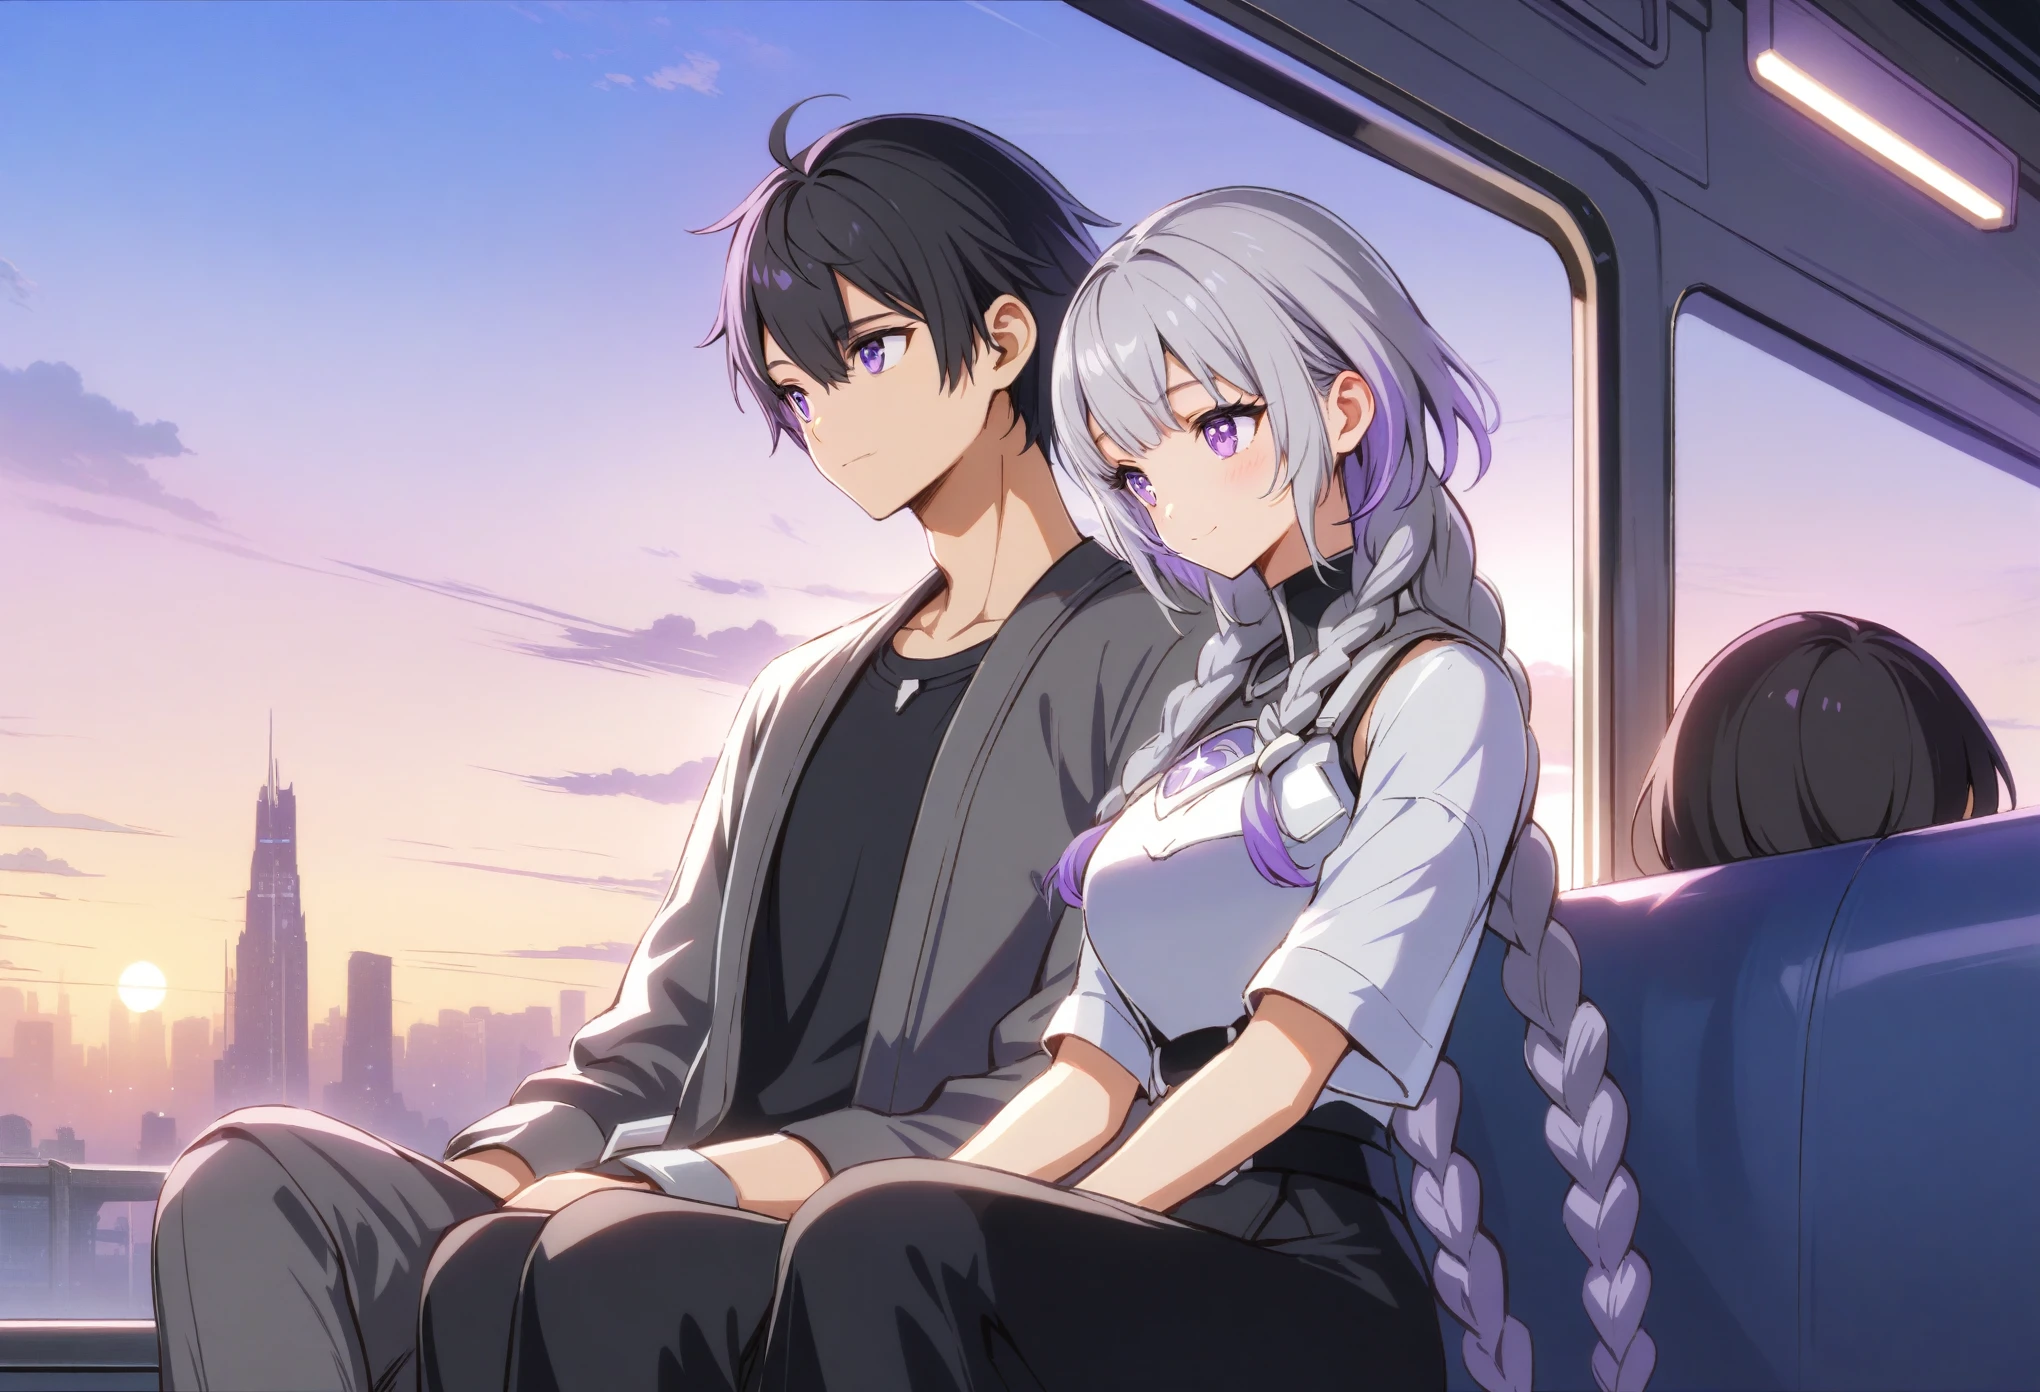 from back, a couple sitting on the Moon's rough surface, look at each other, 1girl and 1male, smile,yinji,1girl,(twin braids),purple_hair,purple_eyes,very_long_hair,grey_hair,braided_ponytail,gradient_hair,BREAK 1male,( black hair,short hair), shirt,(Red pupils), huge Earth in the distance.  a dark, starry space background with the glowing Earth. The Moon's surface is rocky and textured. Soft lighting from Earth and ambient space casts gentle shadows. The style blends realism and anime with detailed character designs and realistic environmental elements. Masterpiece, highly detailed, intricate textures, soft lighting, realistic environment, anime style, futuristic clothing, serene mood